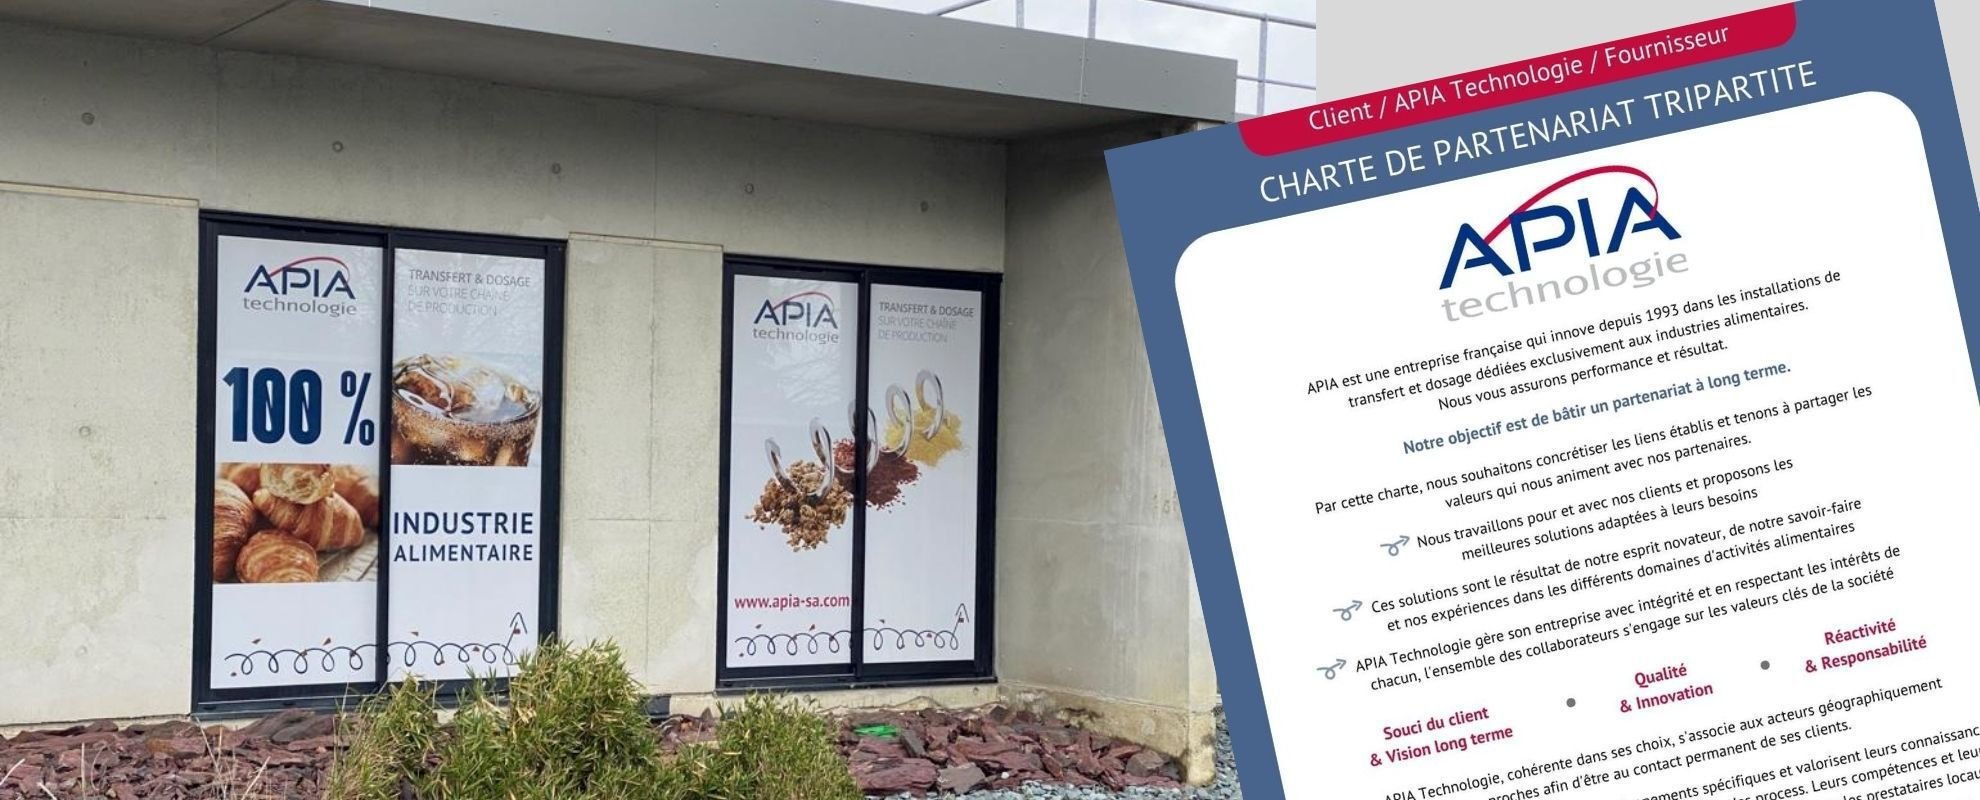 APIA Technologie charter for partnership and commitment to its customers and suppliers, with the front of the APIA facility in the background